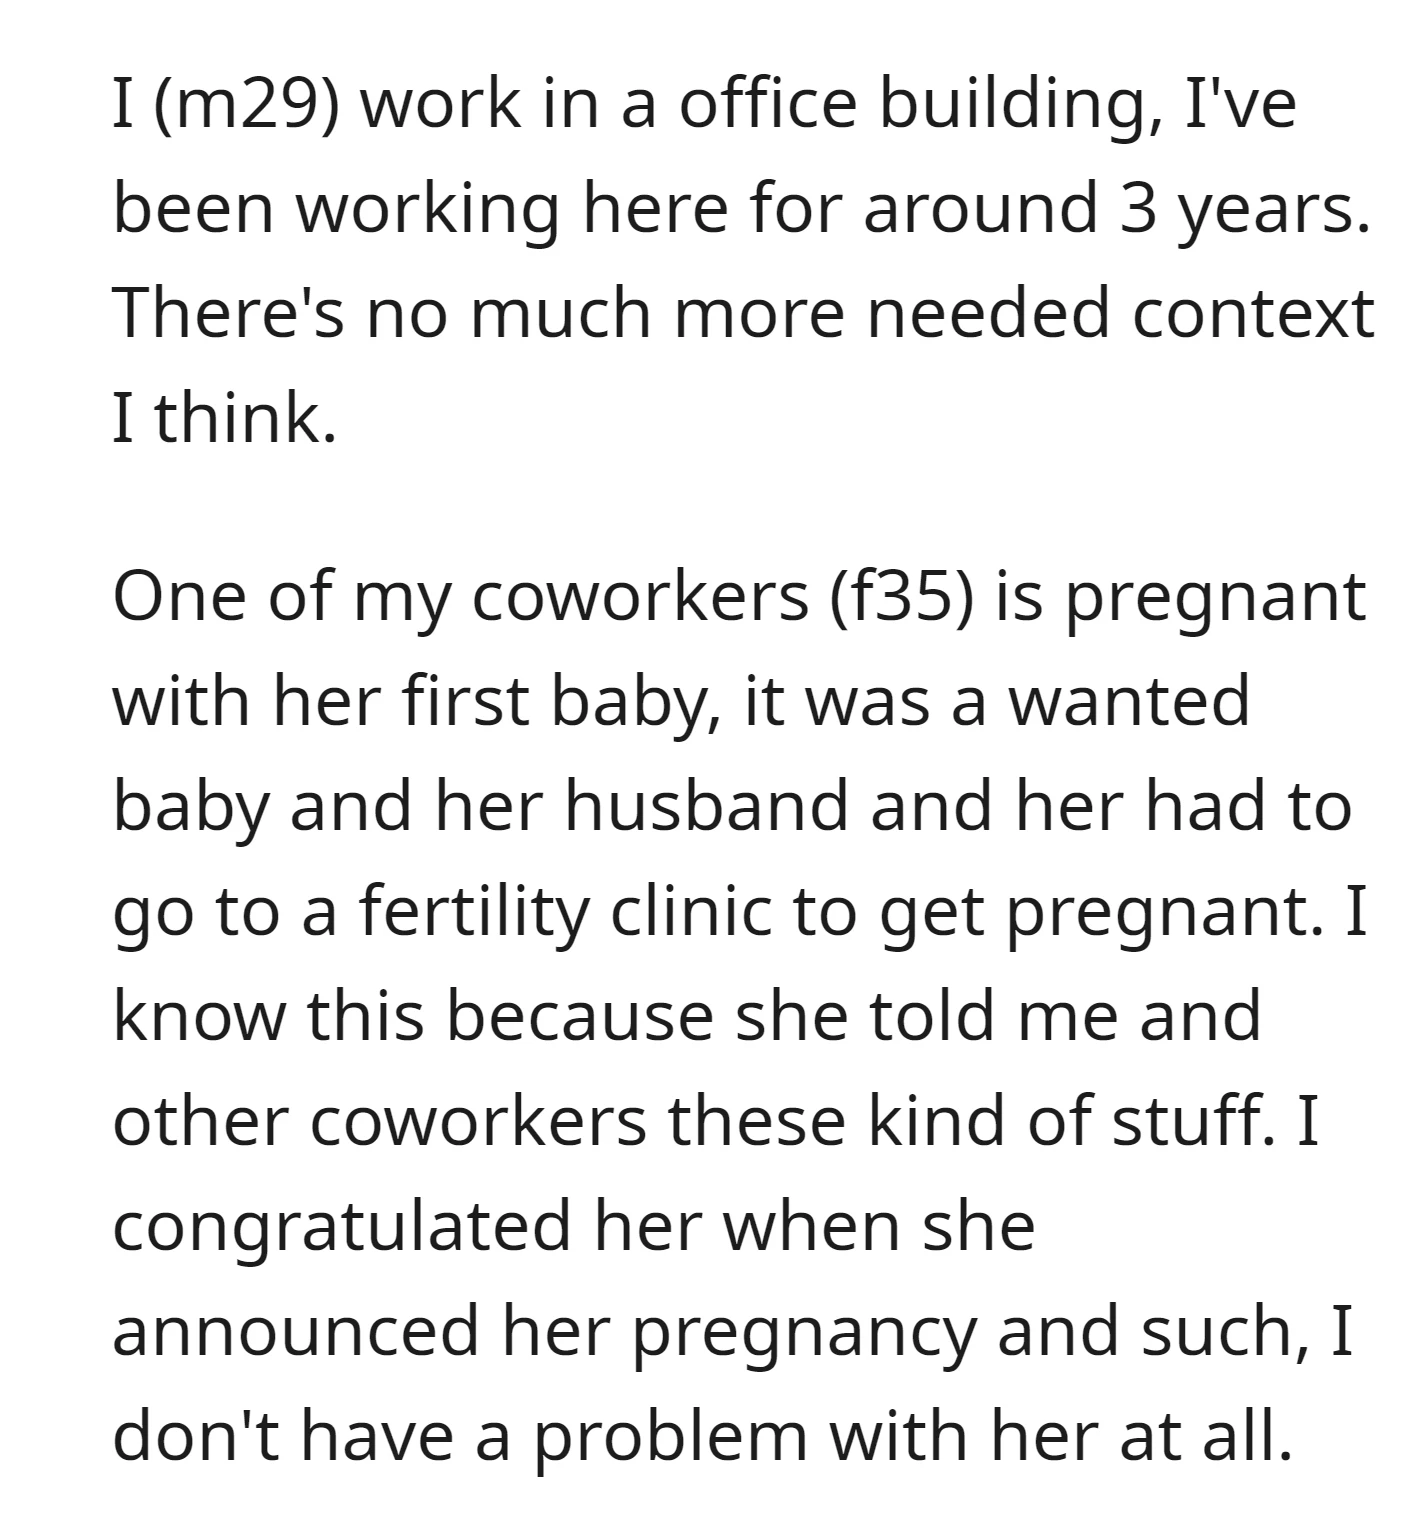 OP's pregnant coworker openly shared her fertility clinic journey with colleagues